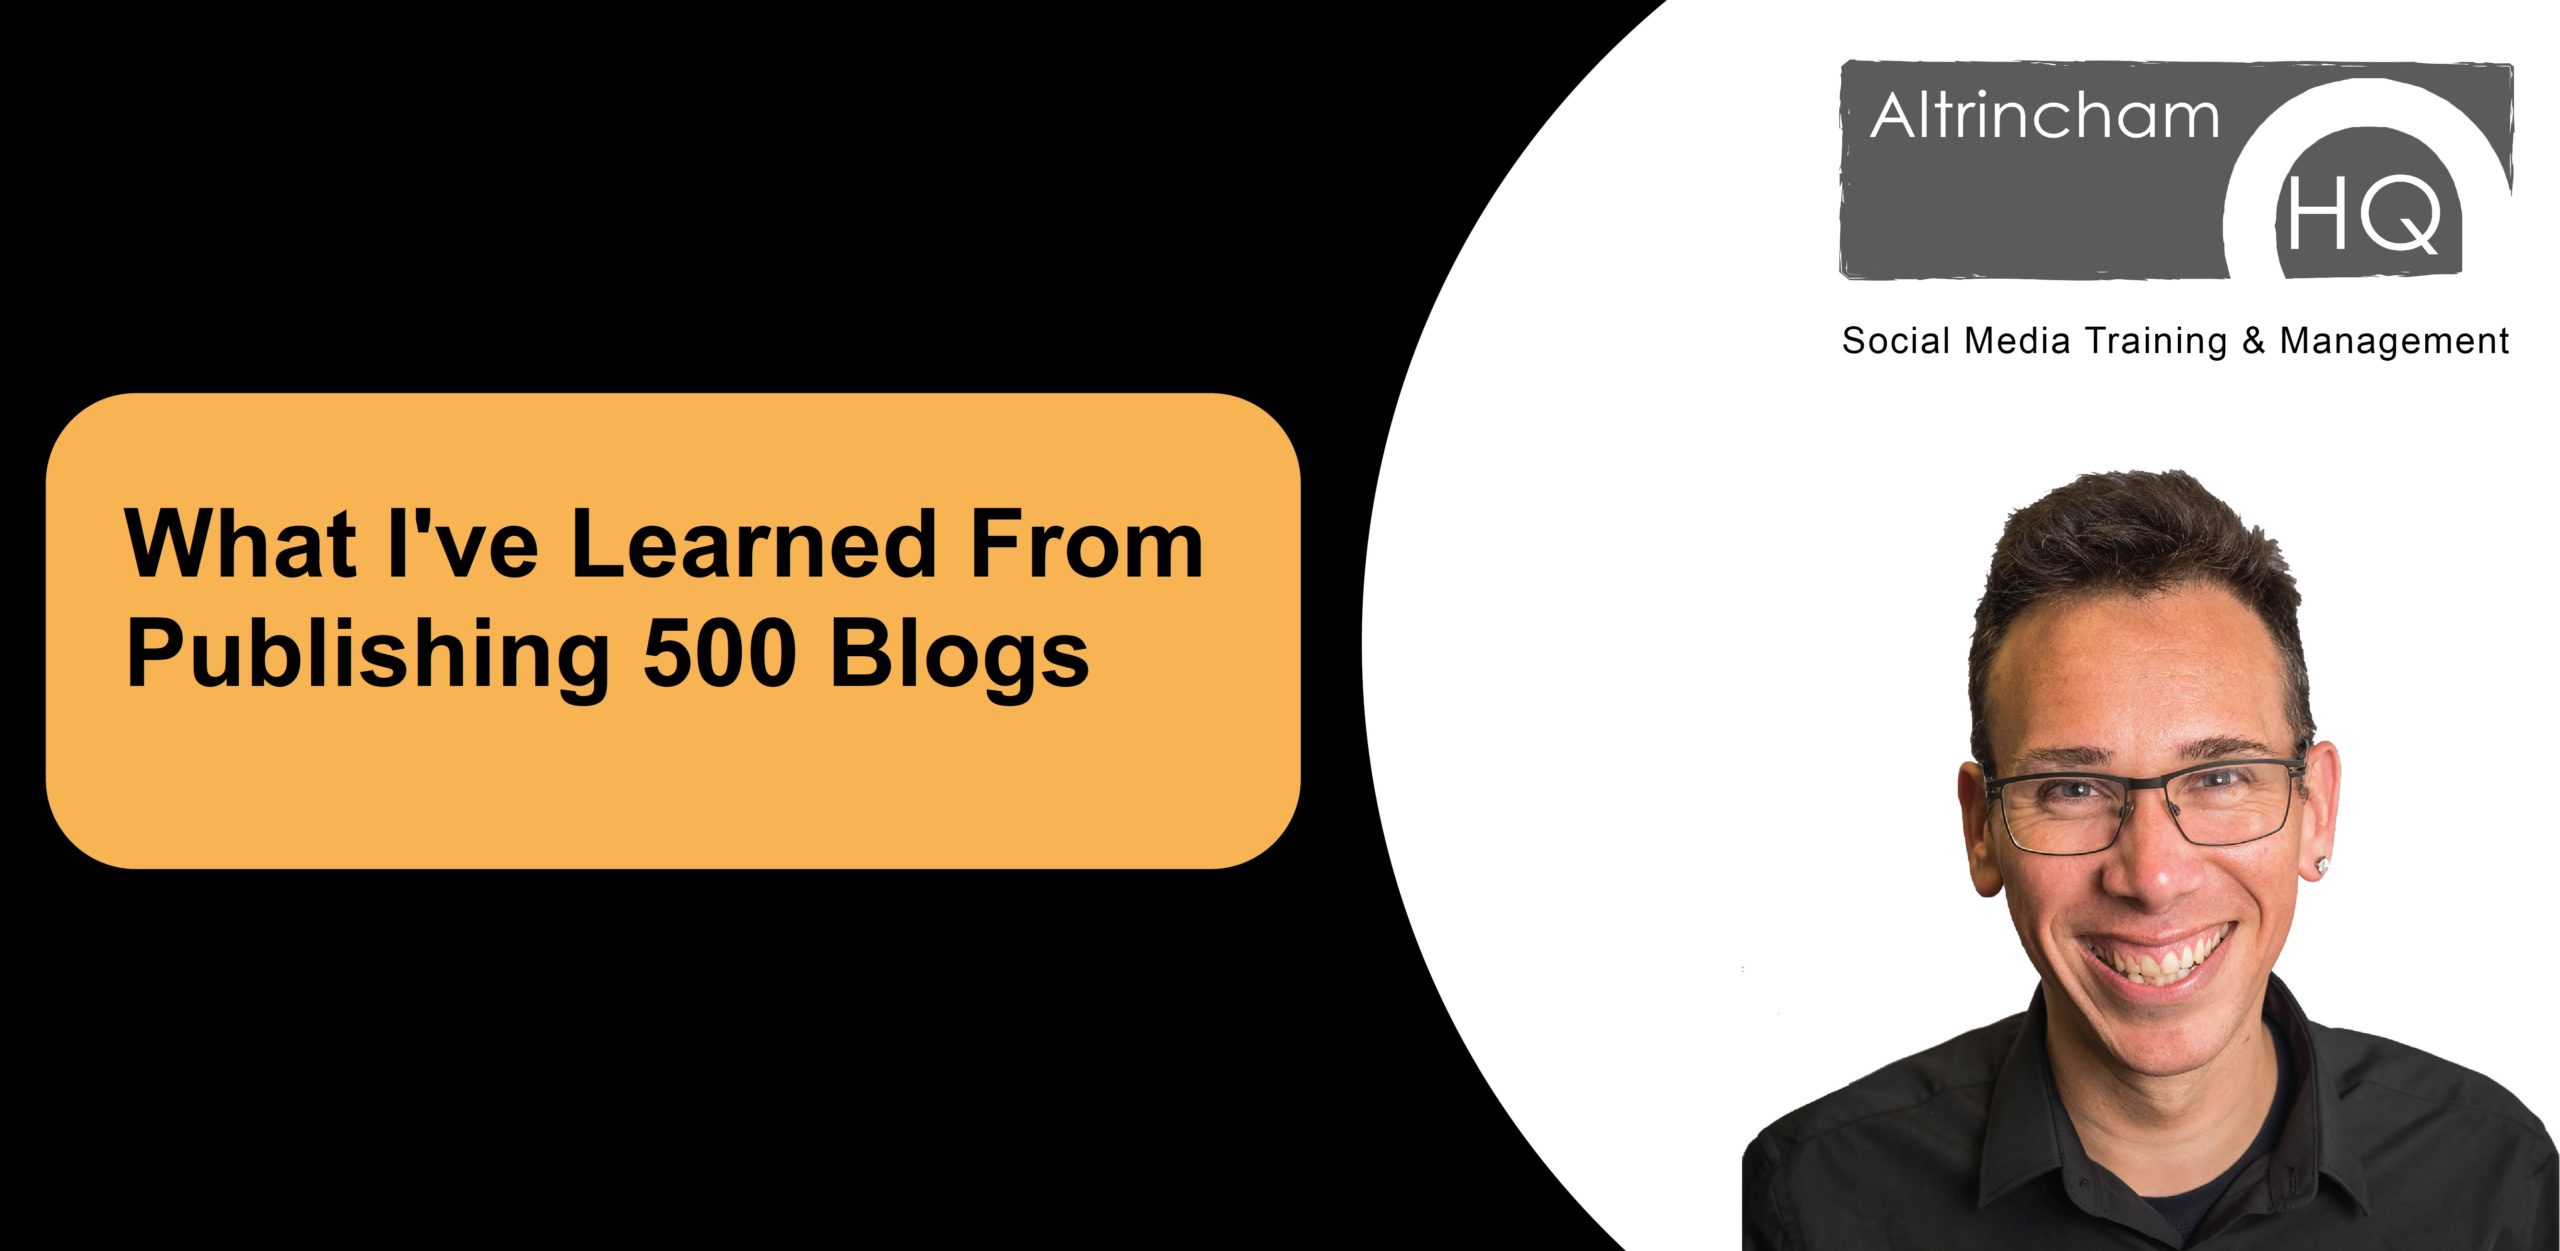 What I’ve Learned From Publishing 500 Blogs